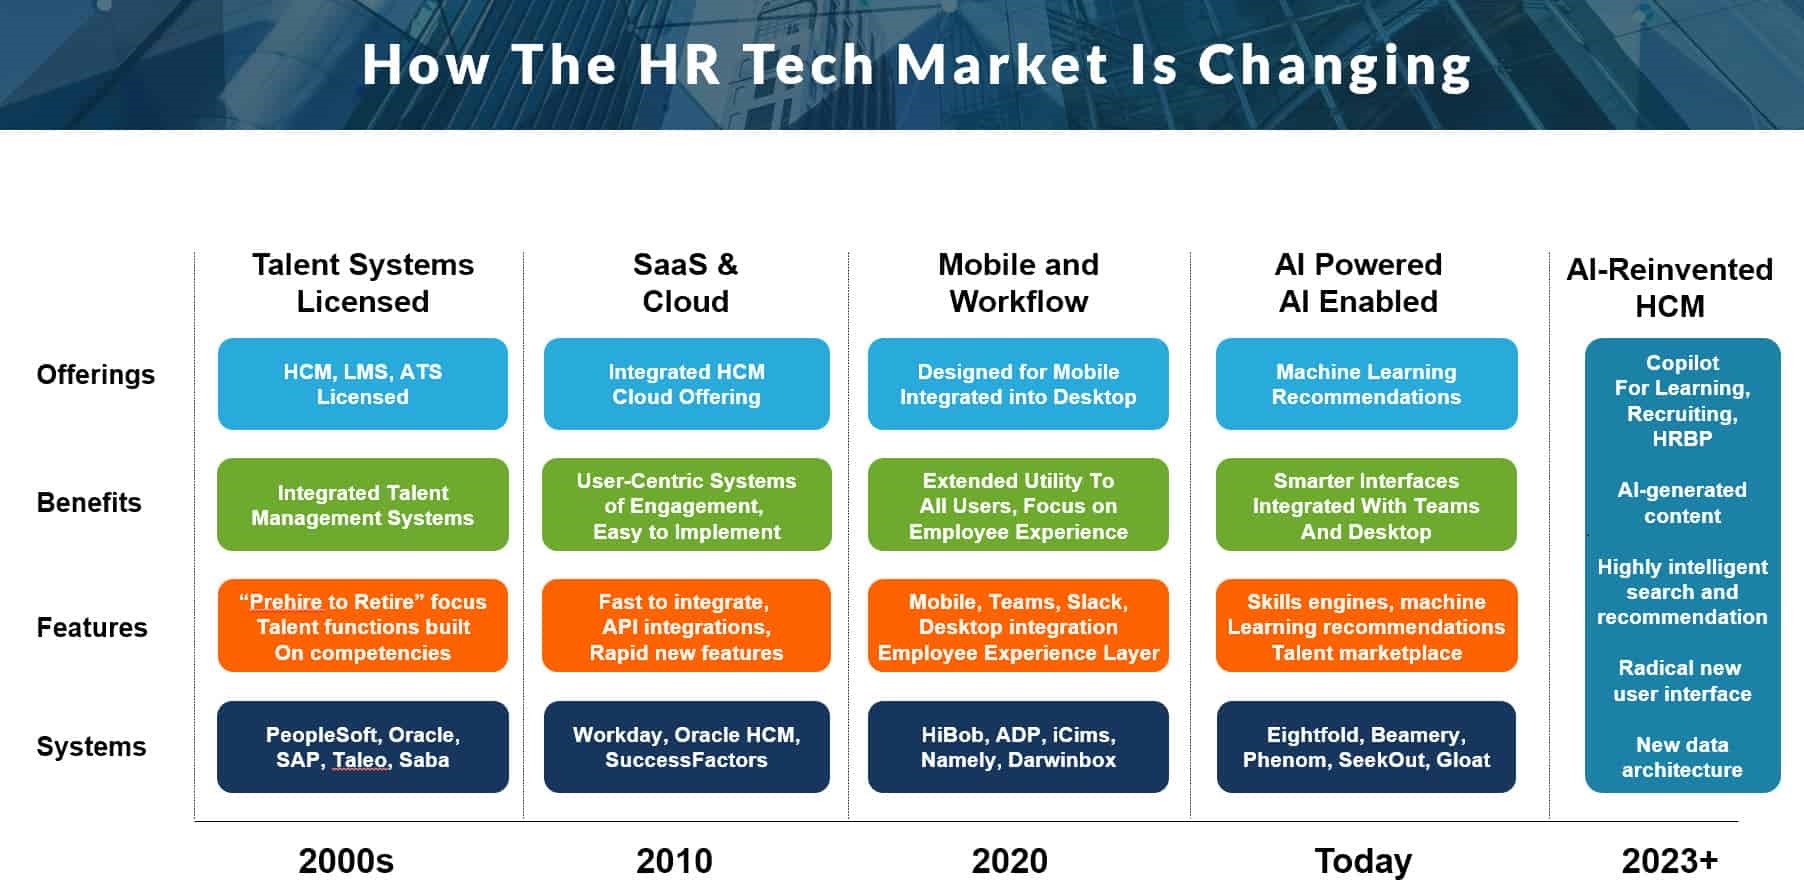 How the HR Tech Market is Changing